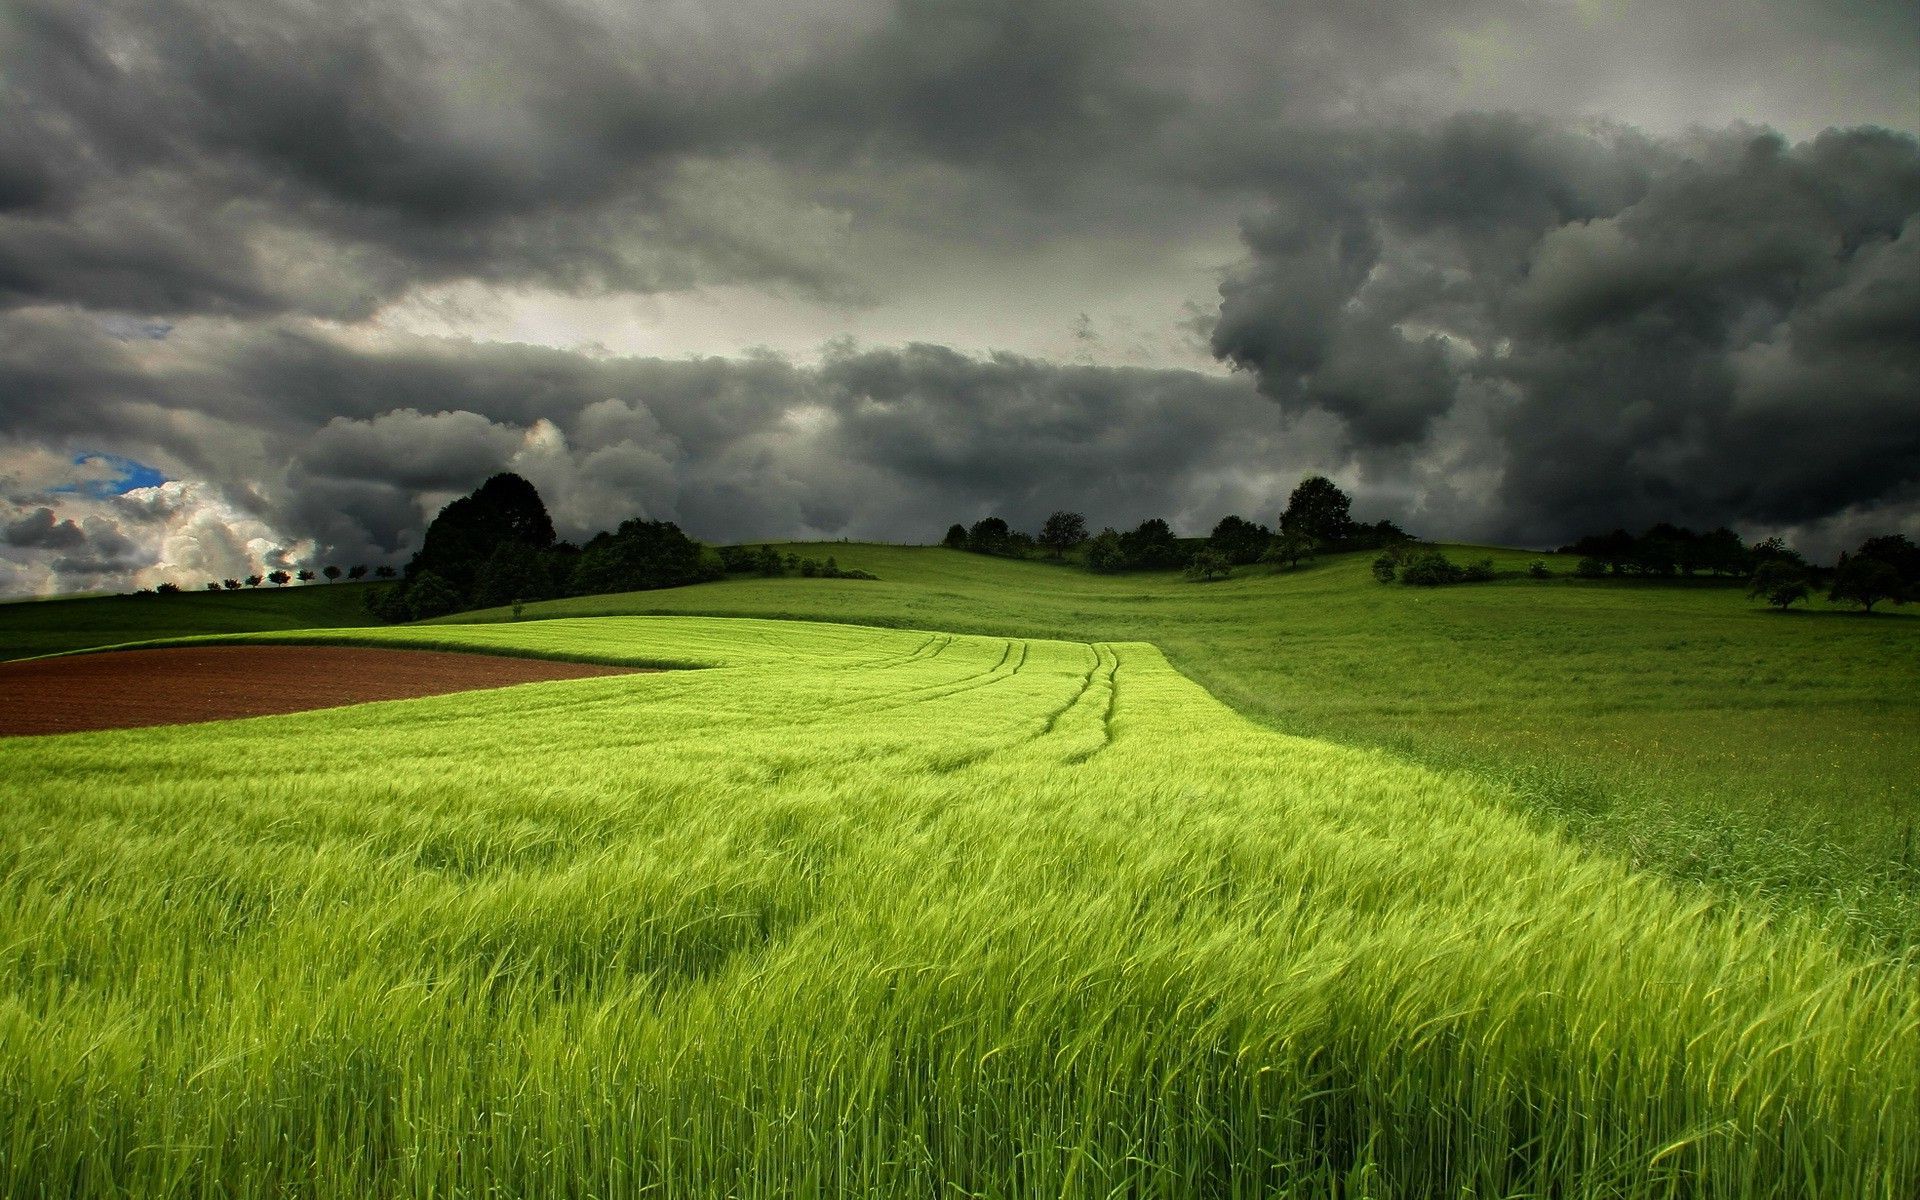 Storm clouds brewing over the field HD Wallpaper 1920x1080 Storm